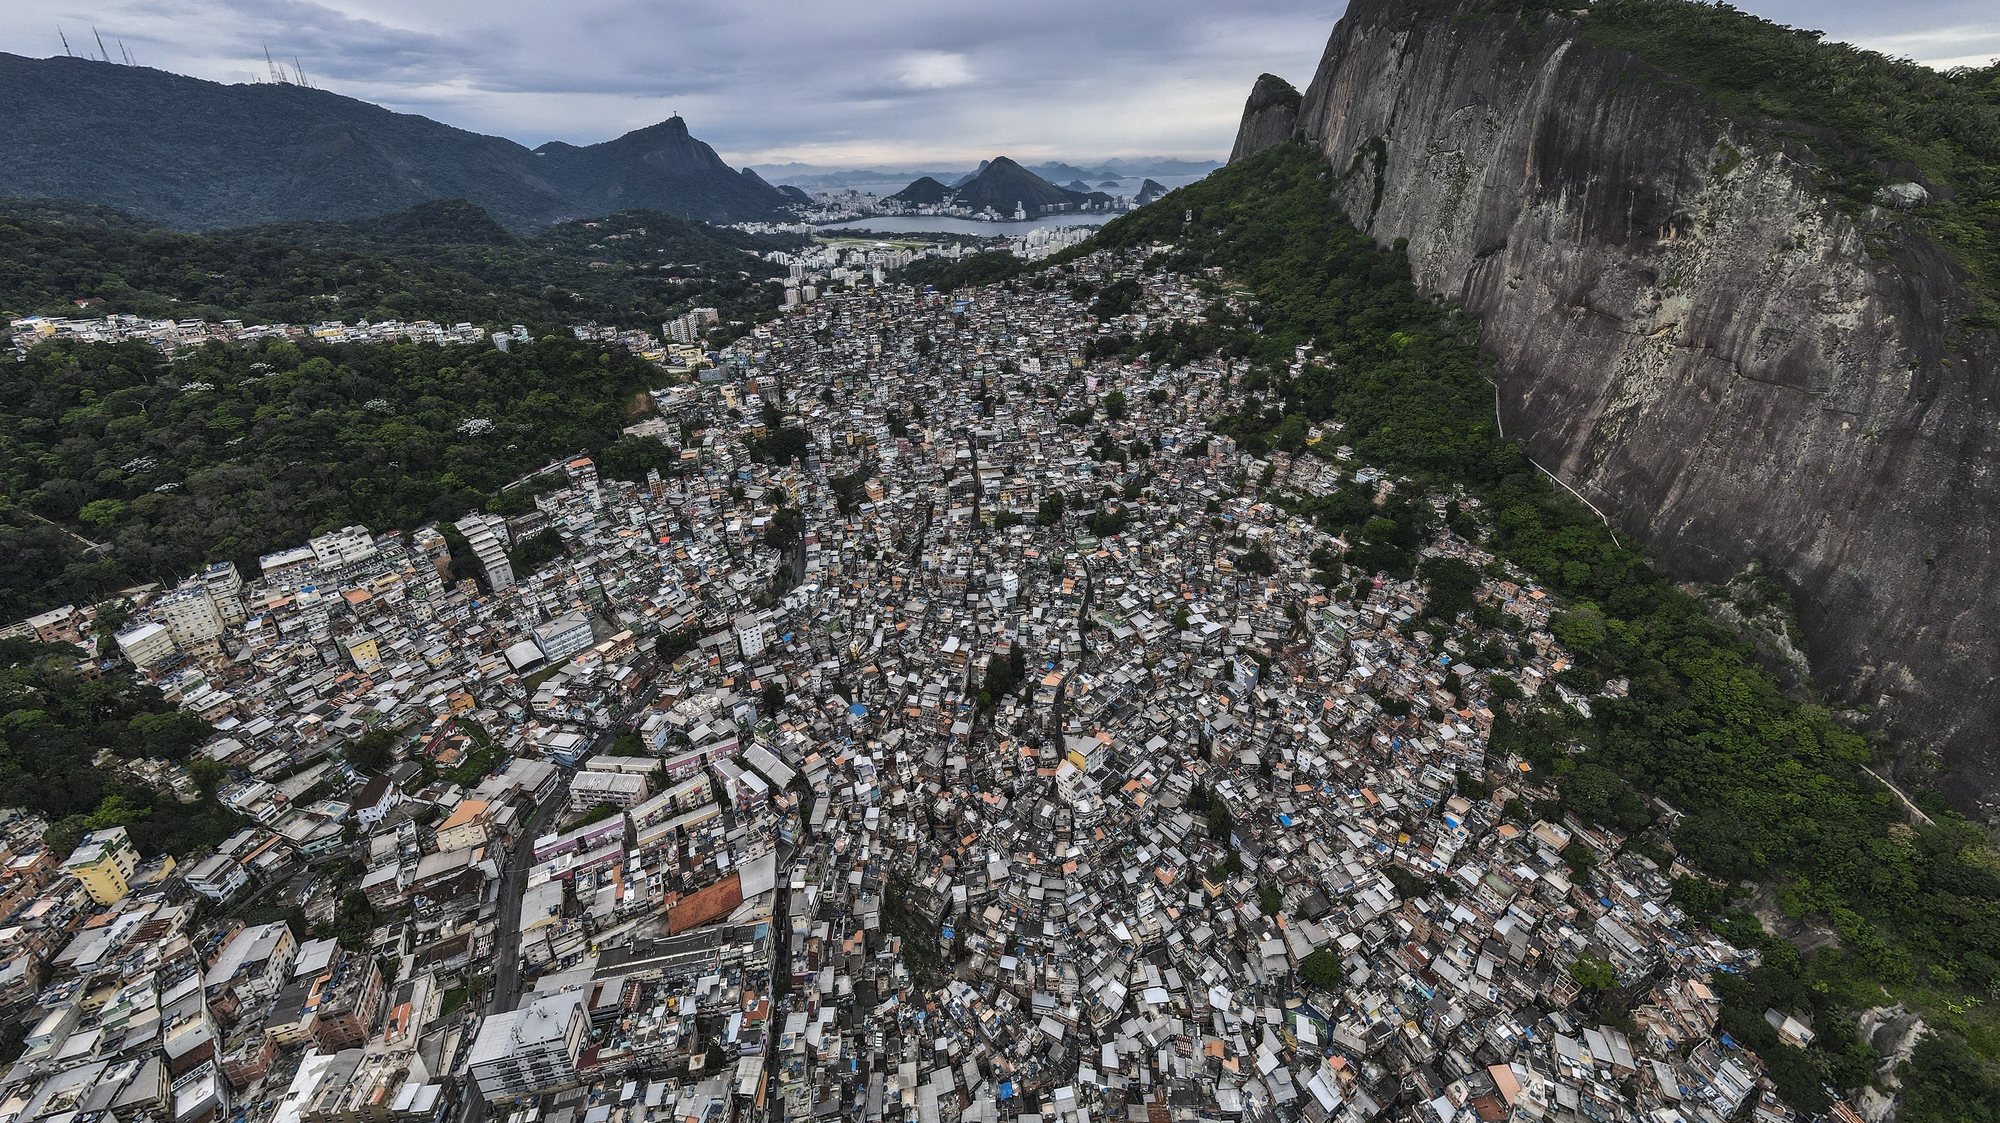 epa10275081 Aerial photograph showing the La Rocinha favela during the second round of the presidential elections in Rio de Janeiro, Brazil, 30 October 2022. Brazilians headed to polling stations on 30 October to decide between former President Luiz Inacio Lula da Silva or his rival, current President Jair Bolsonaro, as head of State for the 2022-2026 period.  EPA/Antonio Lacerda